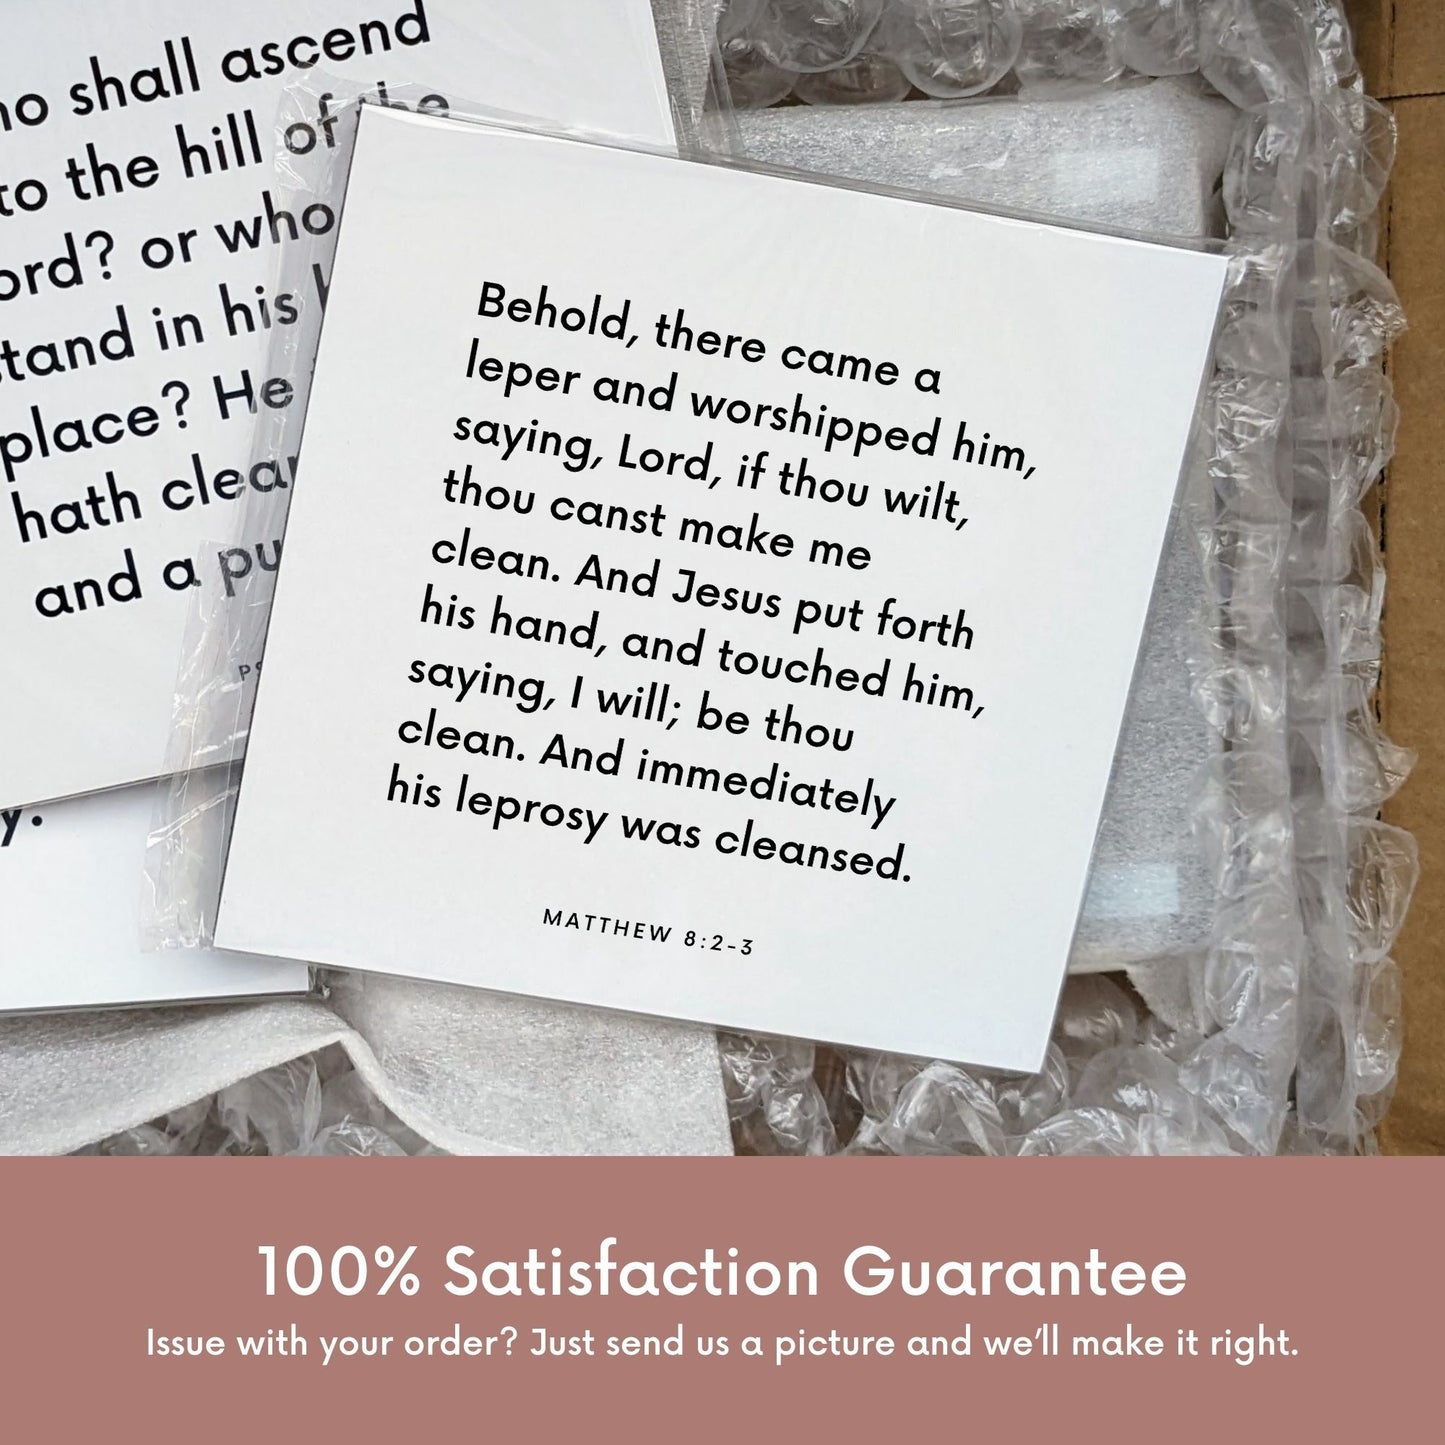 Shipping materials for scripture tile of Matthew 8:2-3 - "Lord, if thou wilt, thou canst make me clean"